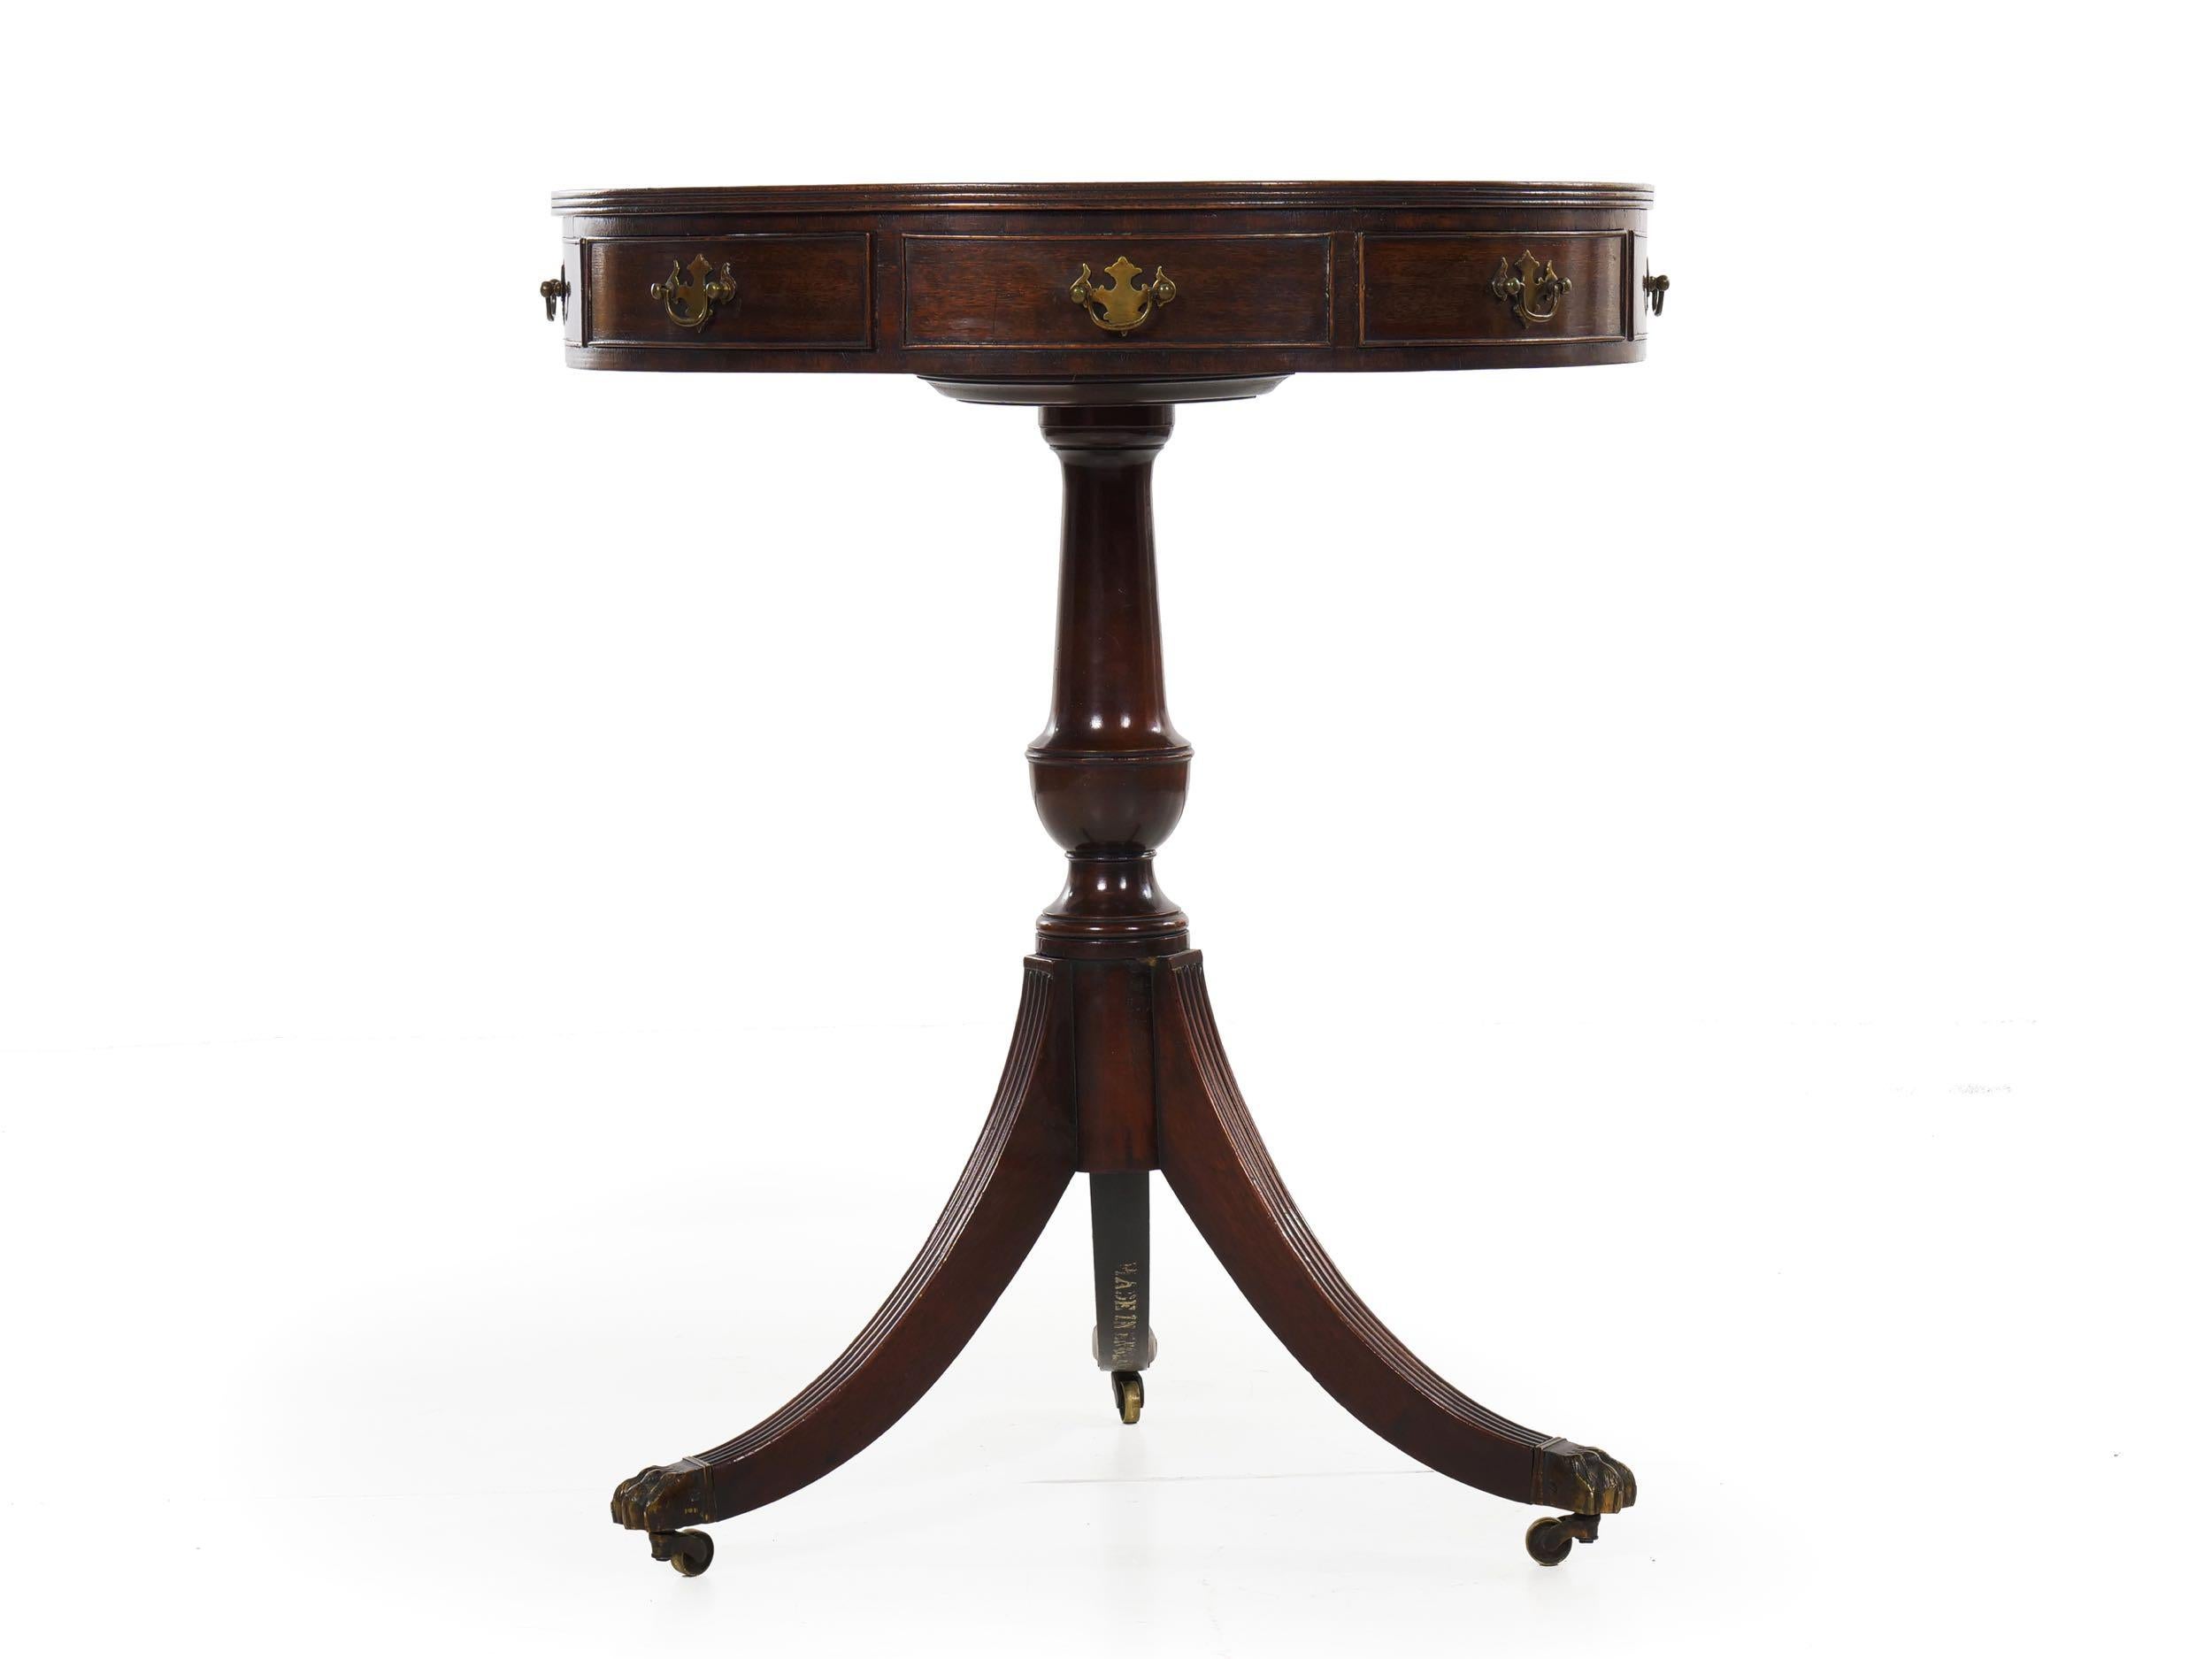 20th Century English Regency Style Antique Mahogany and Leather Drum-Top Accent Table